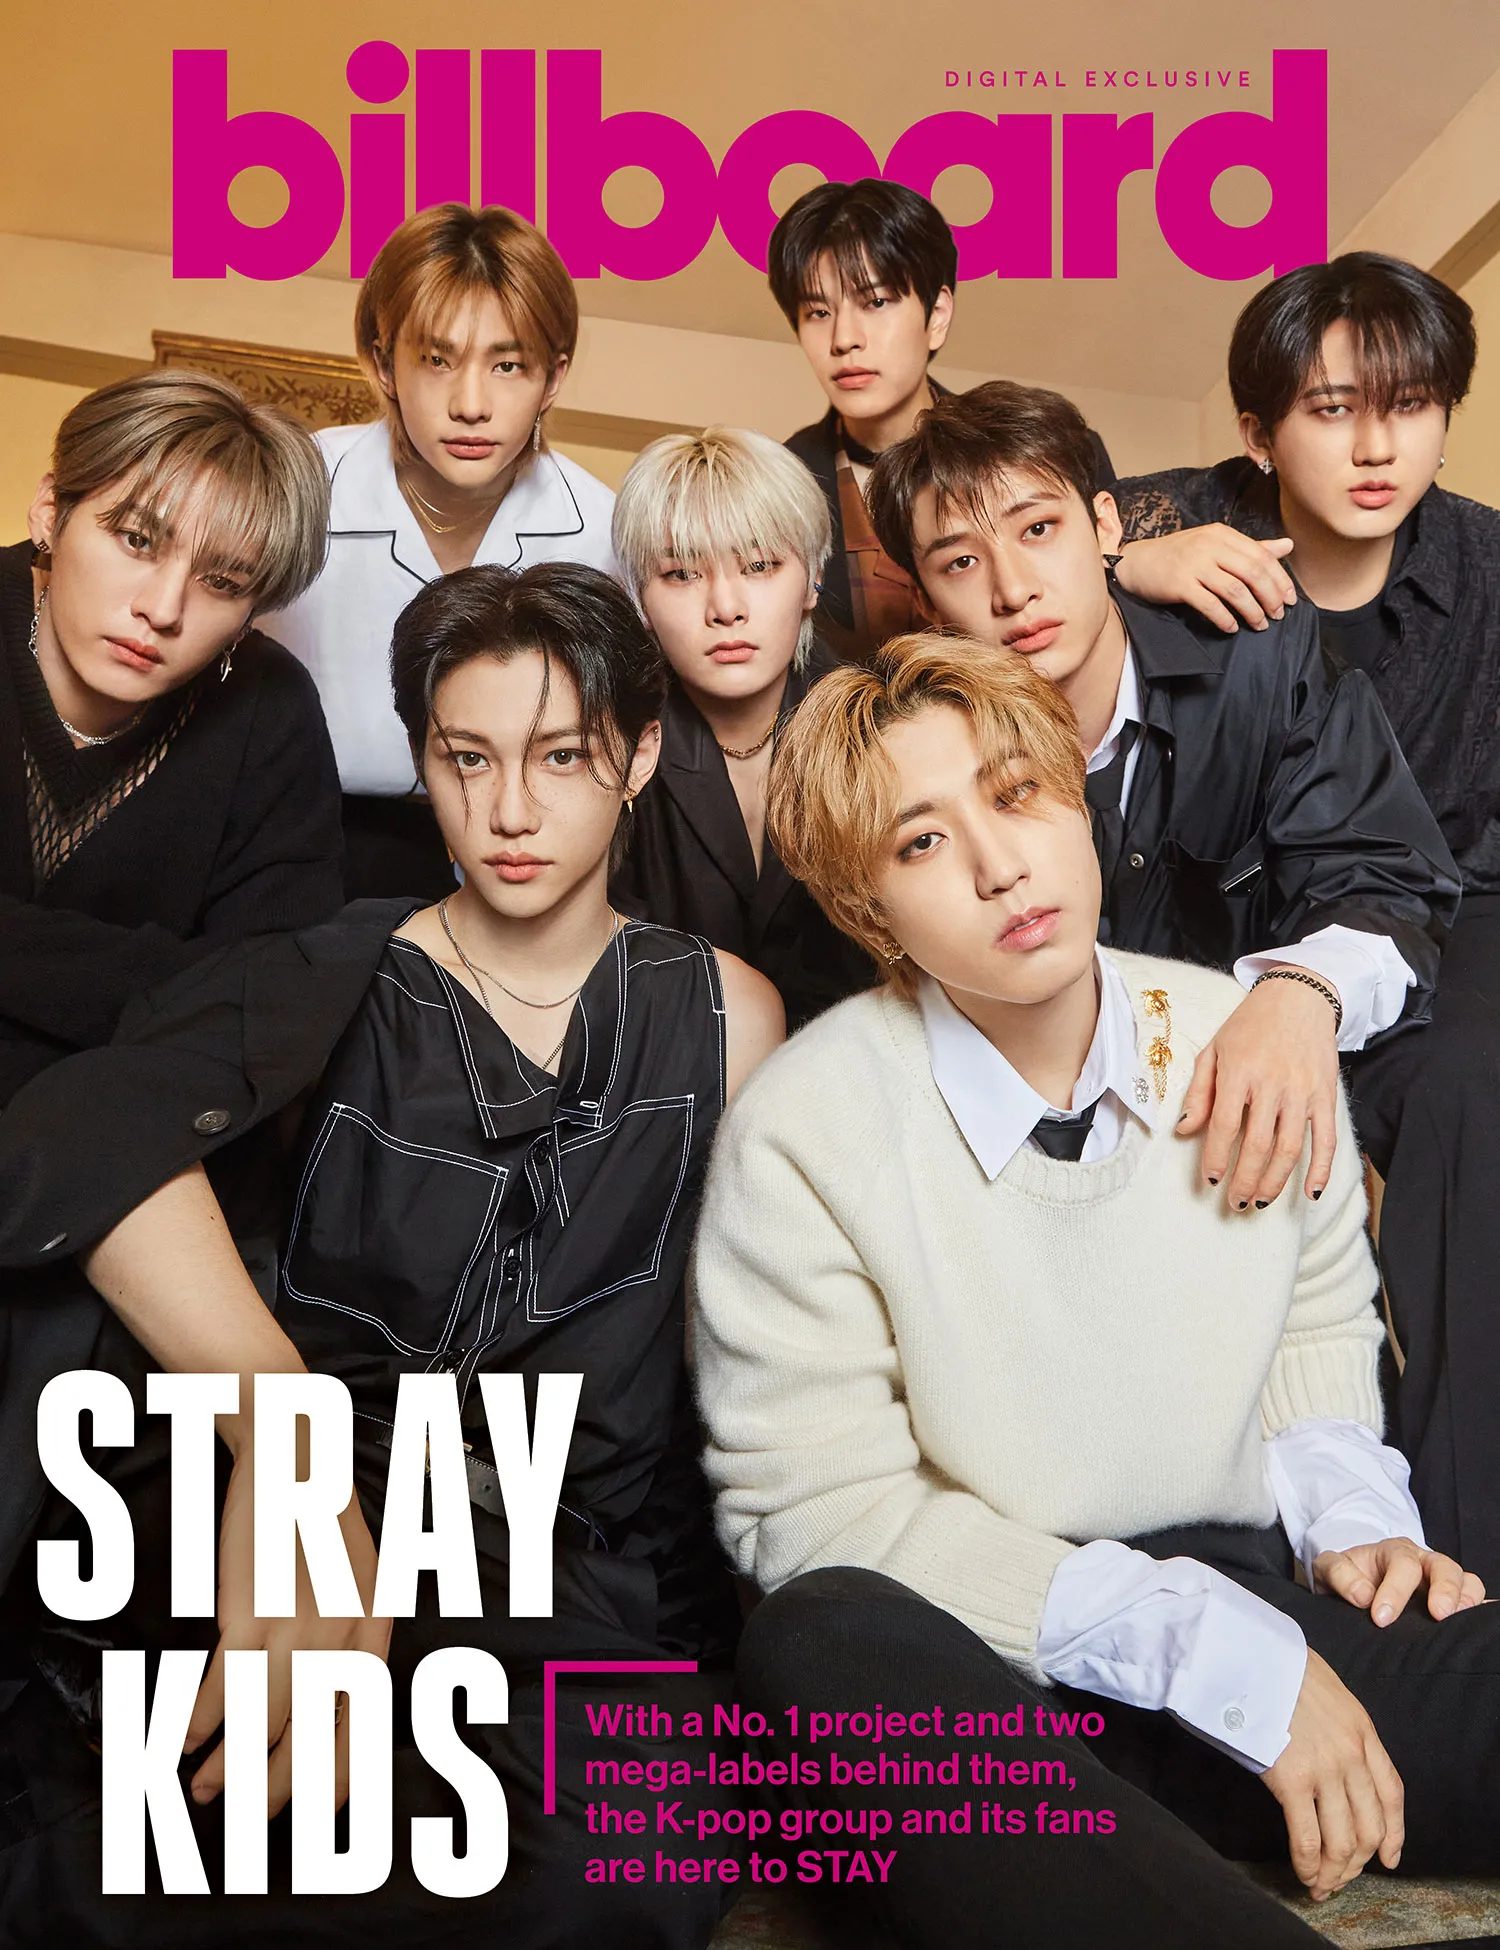 Stray Kids 'Give Strength' to STAY Fans As They Conquer The World